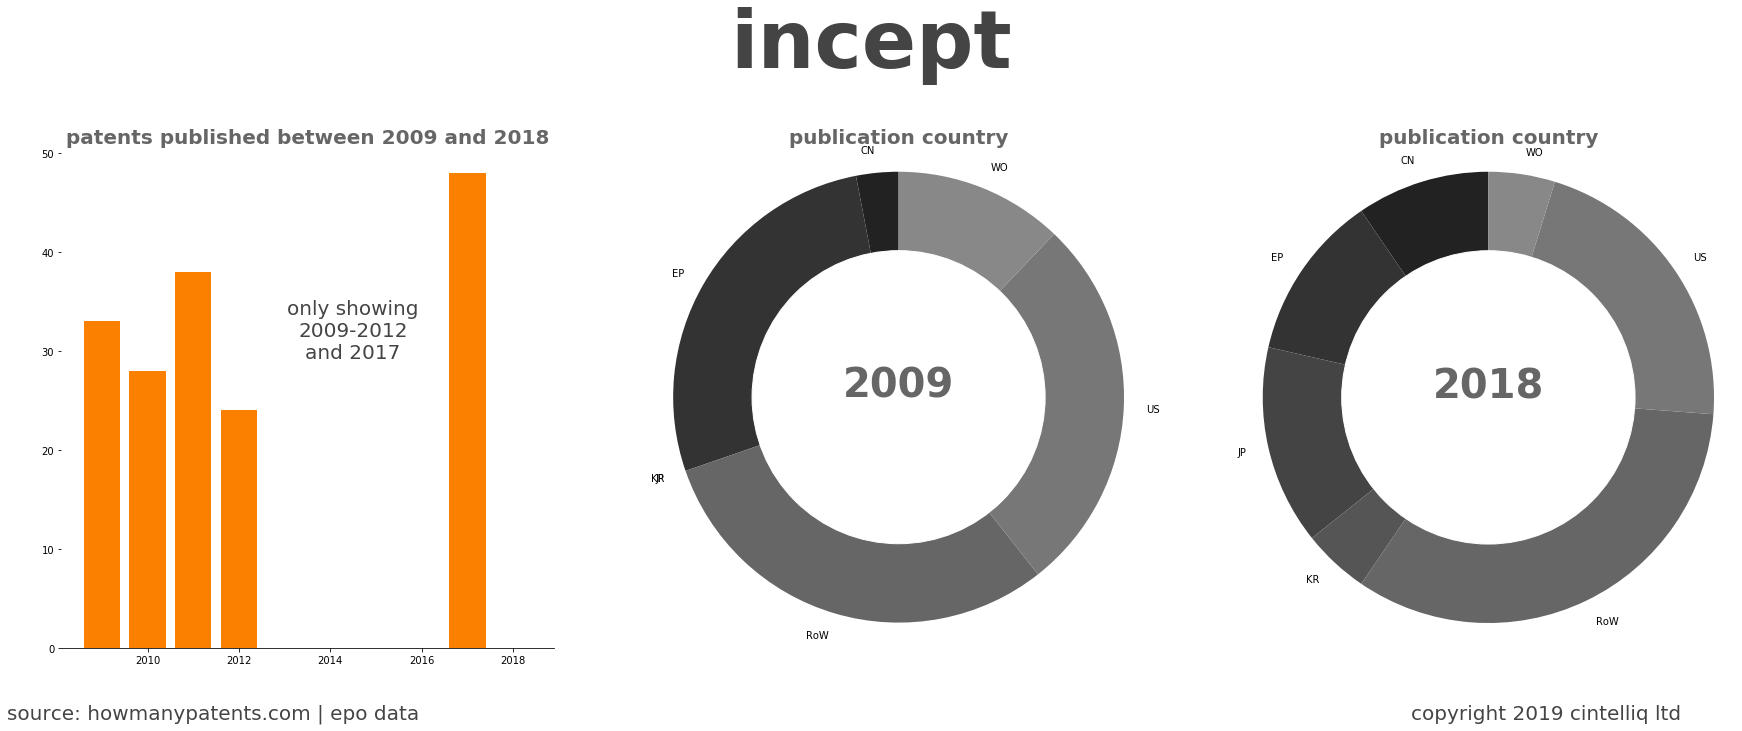 summary of patents for Incept